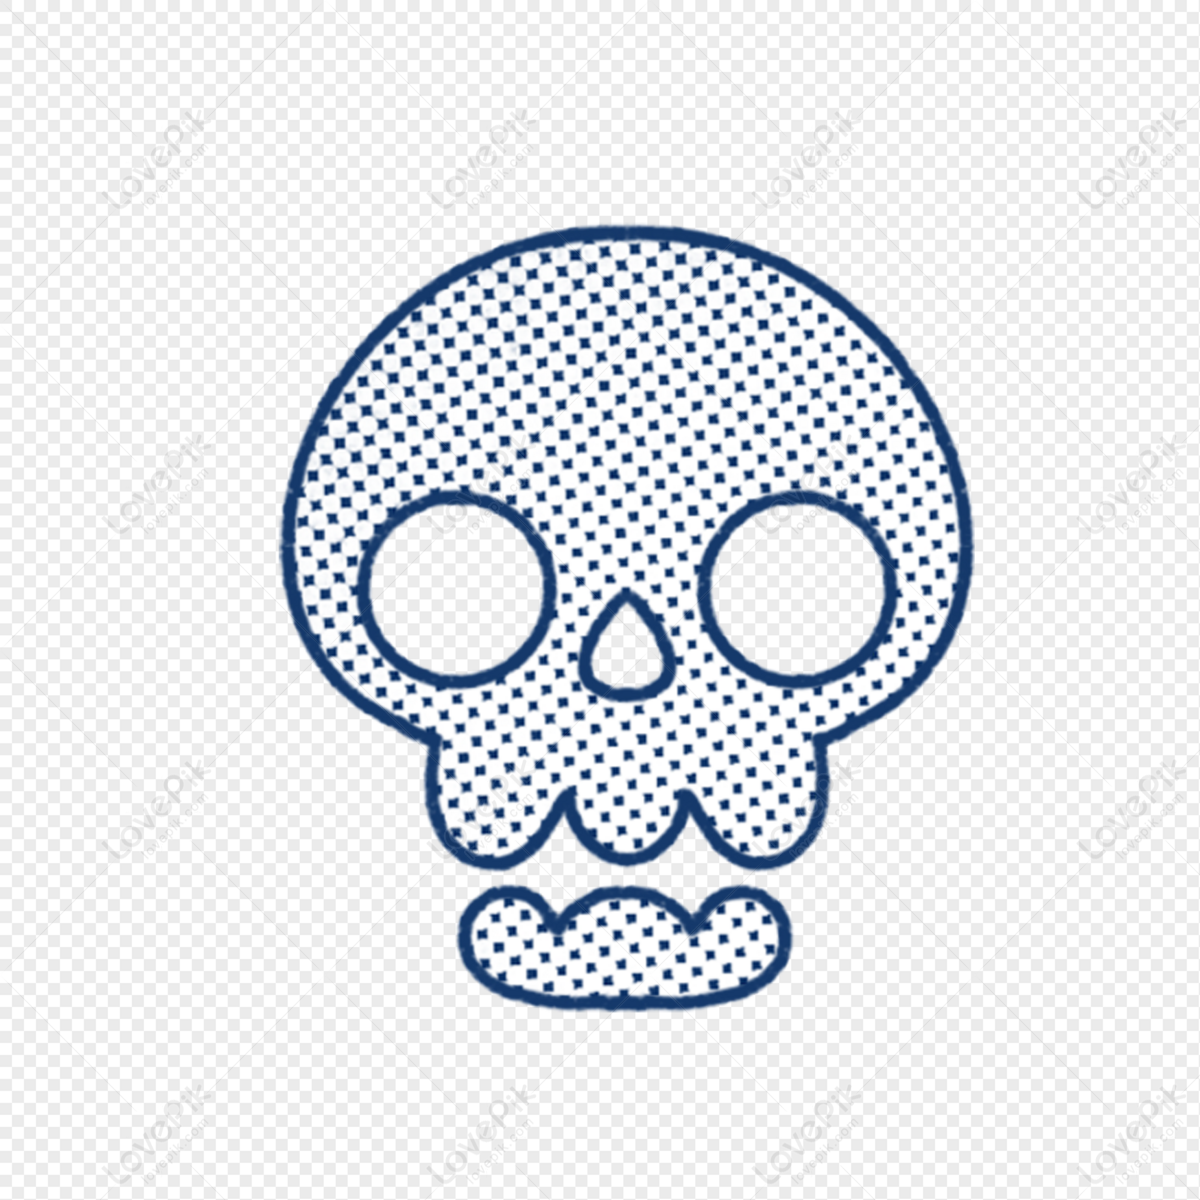 Skull Flowers Vector PNG Images, Skull With Flowers, Skull Clipart, Flowers,  Stick Figure PNG Image For Free Download